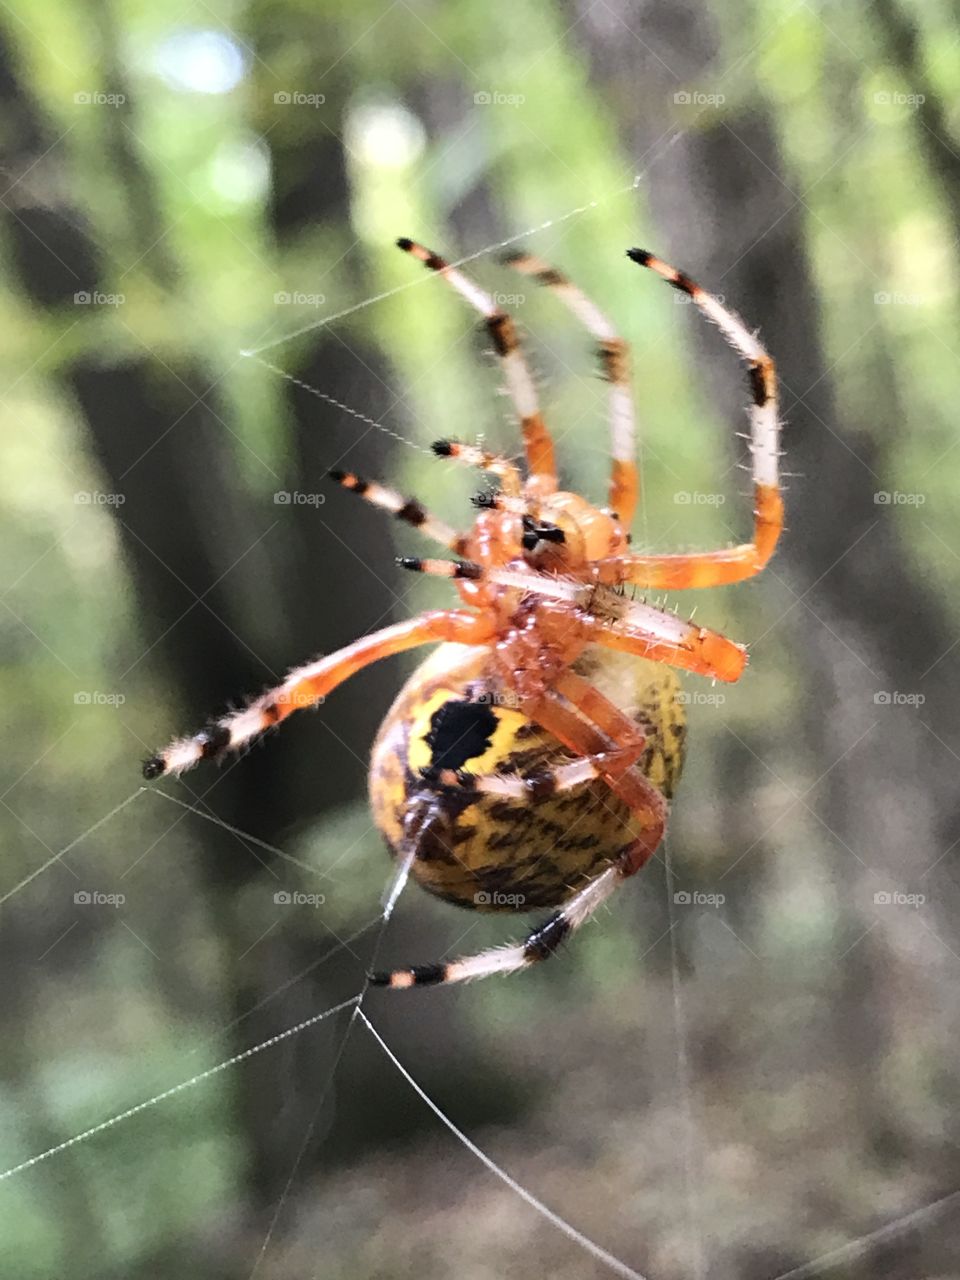 Cone Weaver spider at work making its web. 